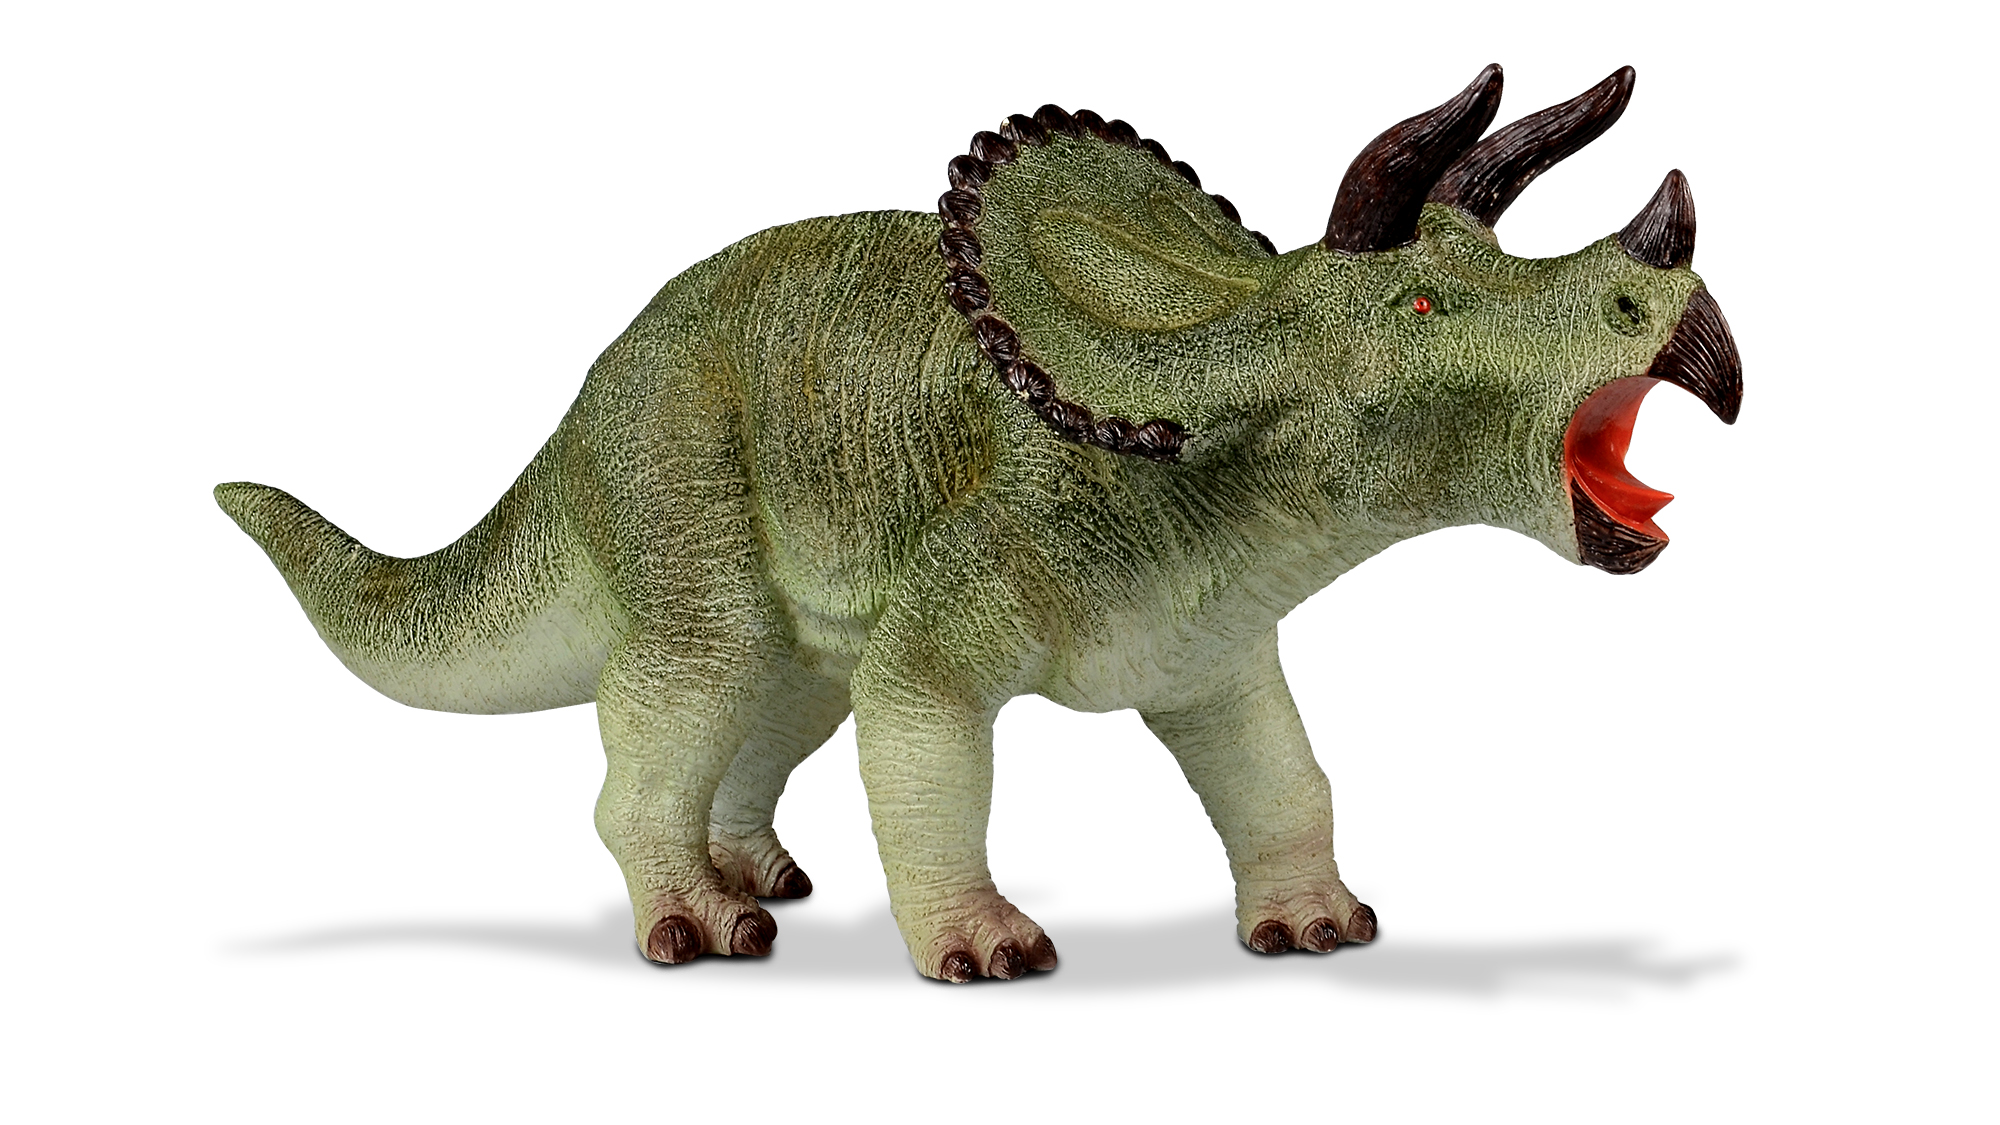 Large size dinosaur - Triceratops toy for gift